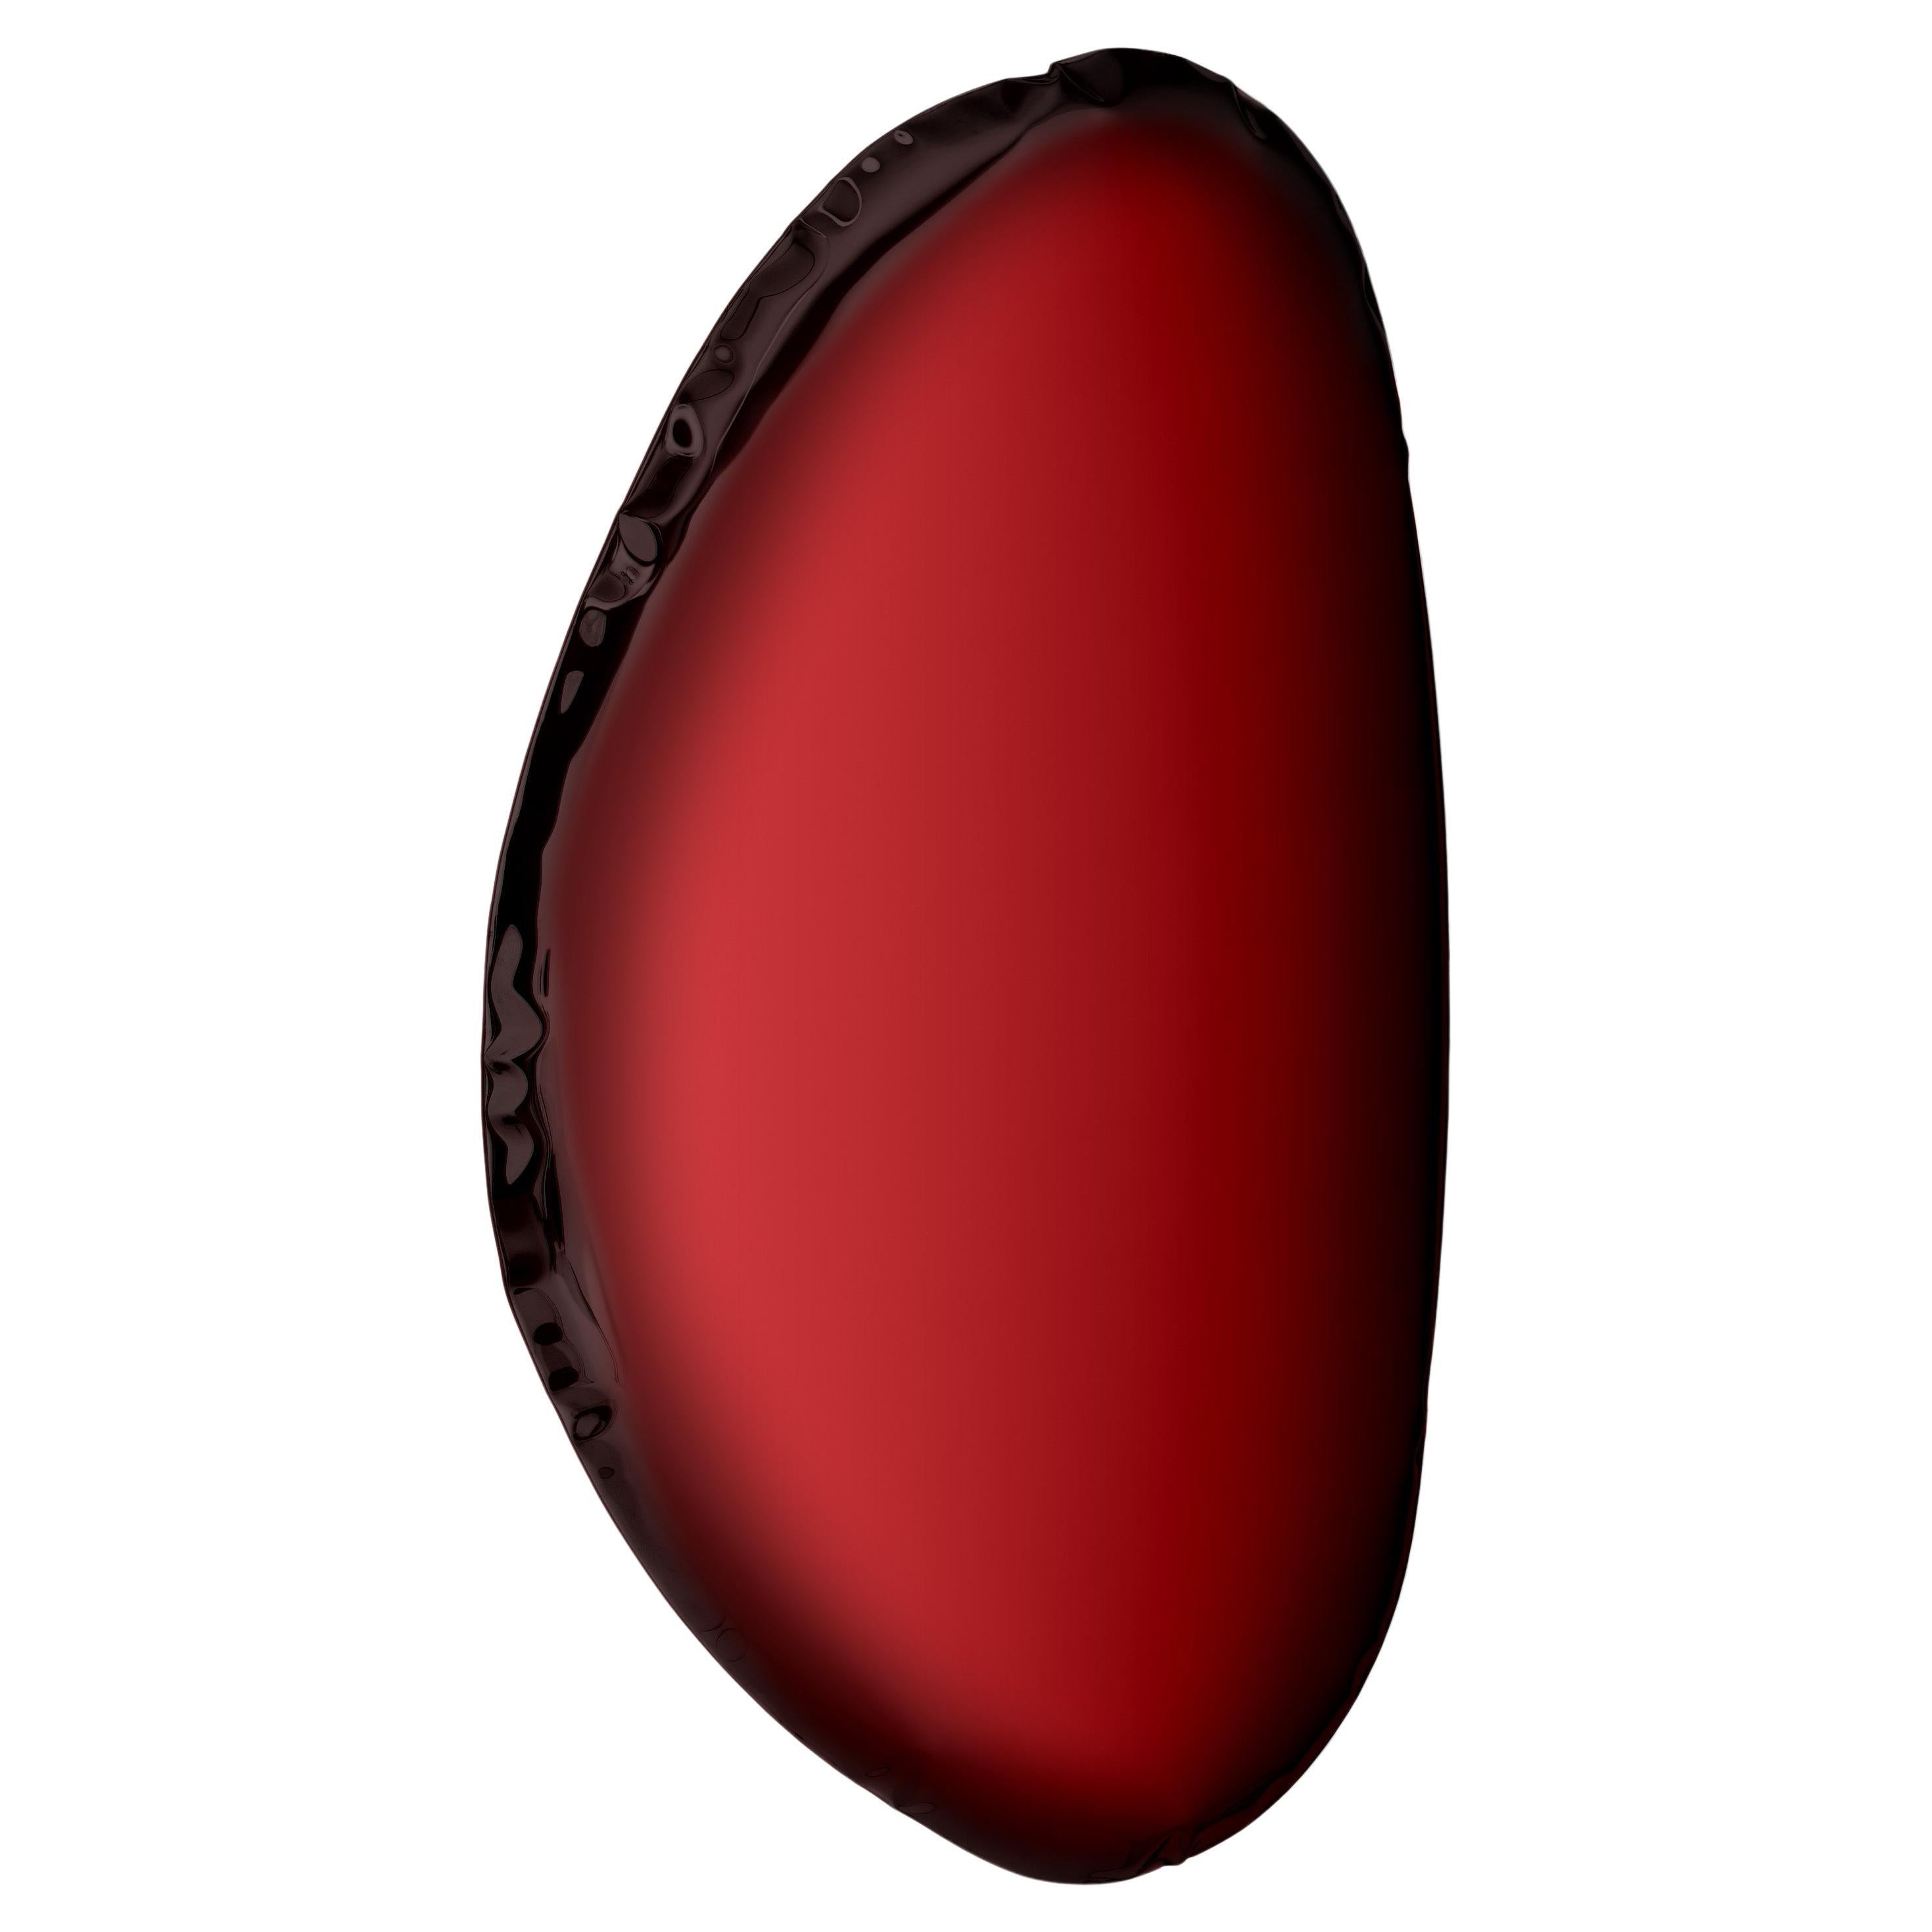 Tafla O3 Polished Rubin Red Color Stainless Steel Wall Mirror by Zieta